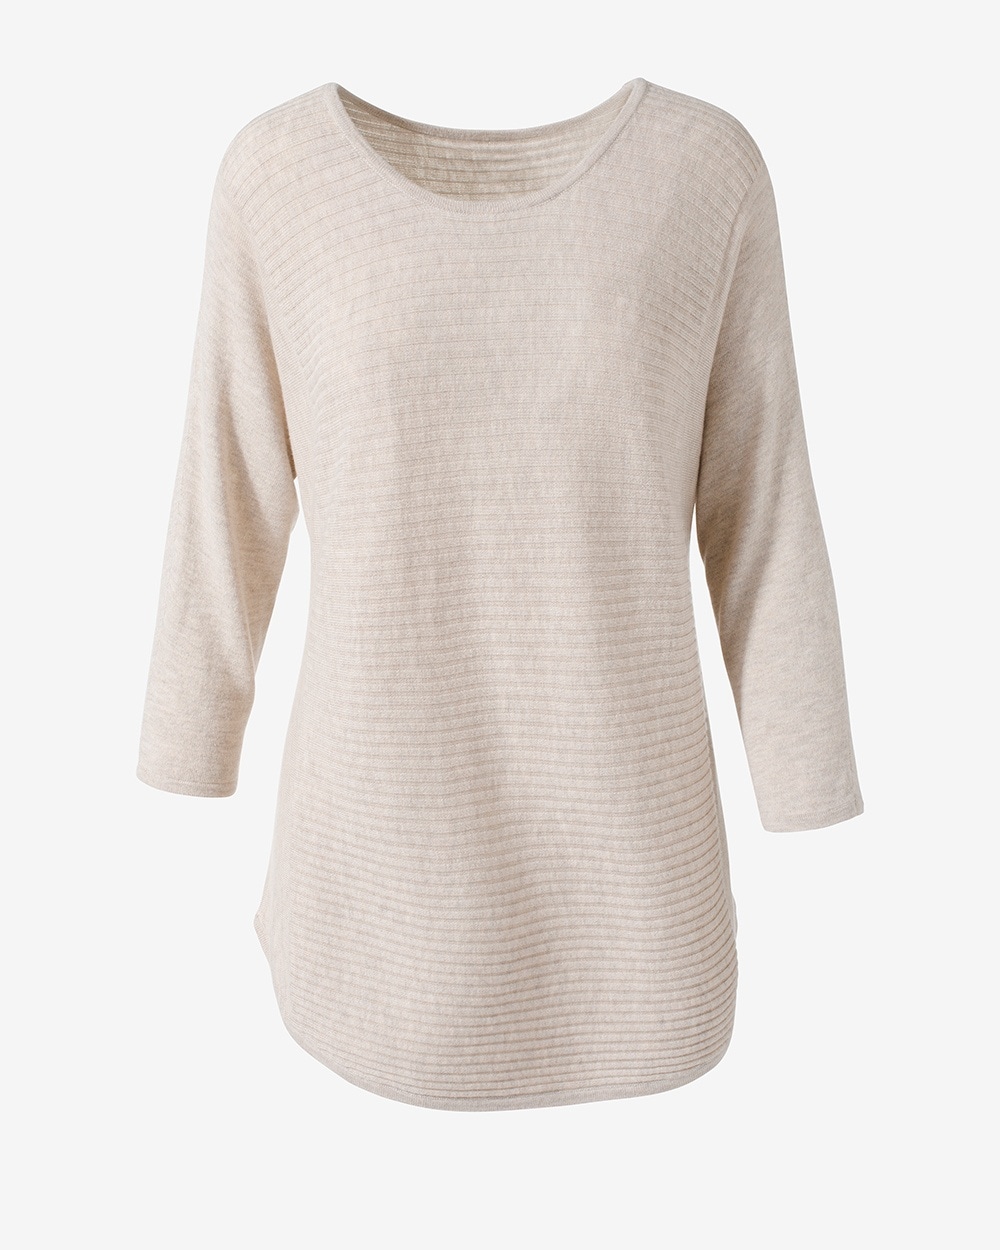 Placed Rib Boat-Neck Sweater